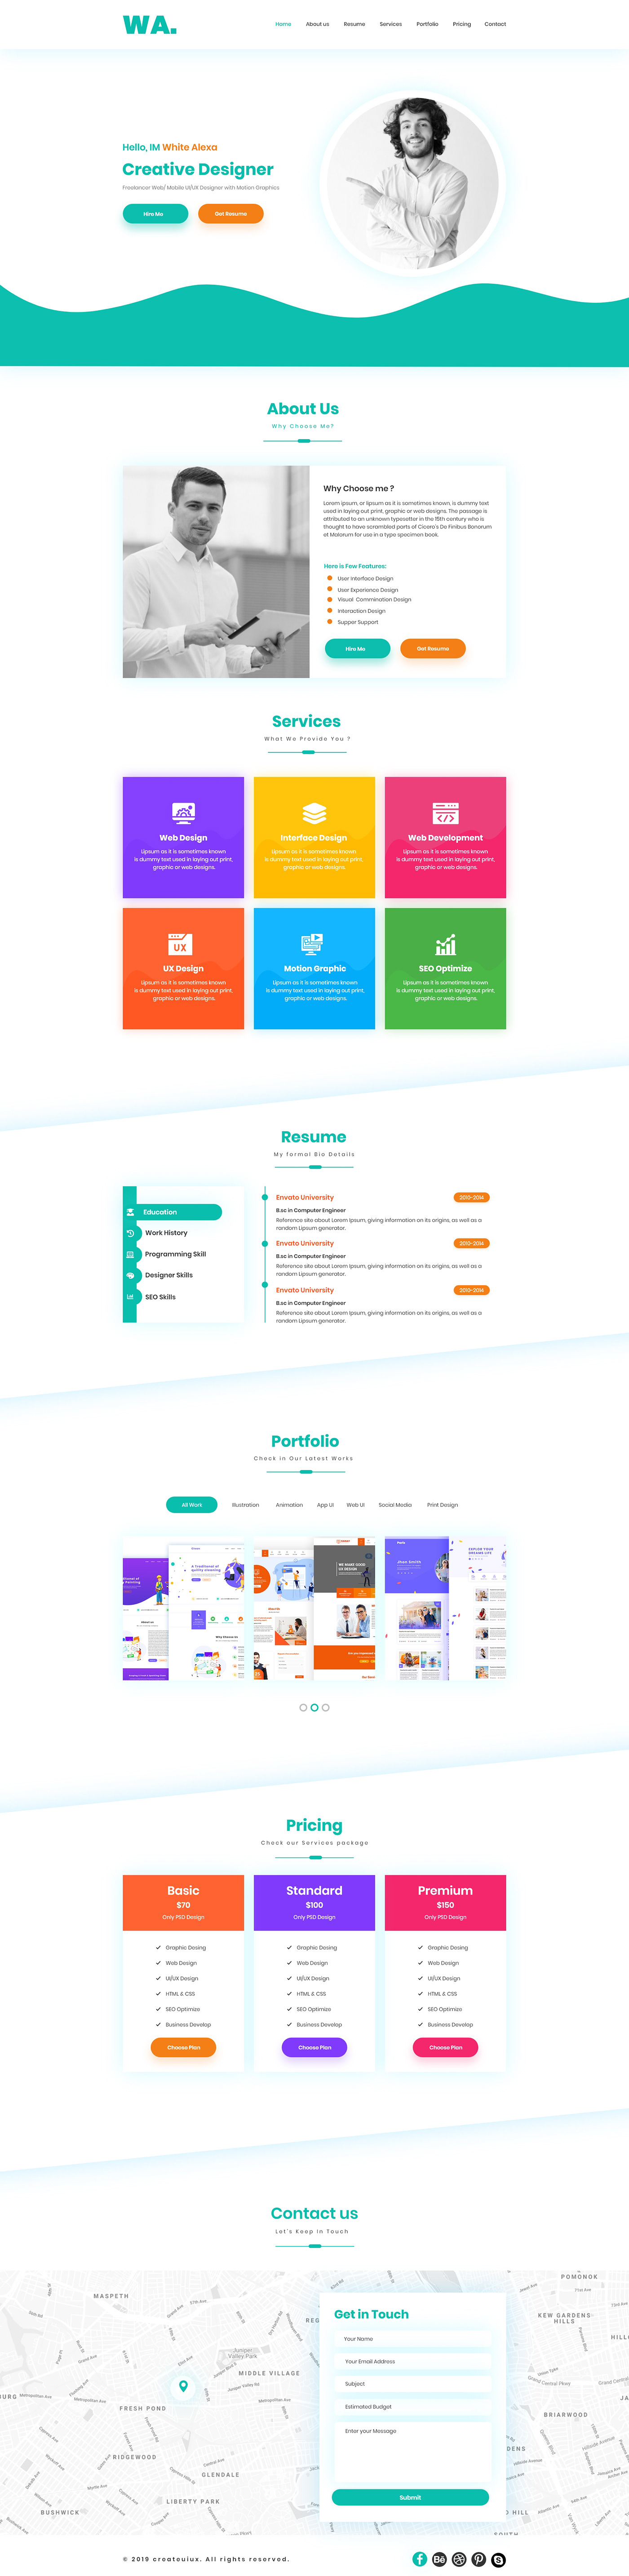 CV CV Template Free download free freebies One Page PS Resume xD